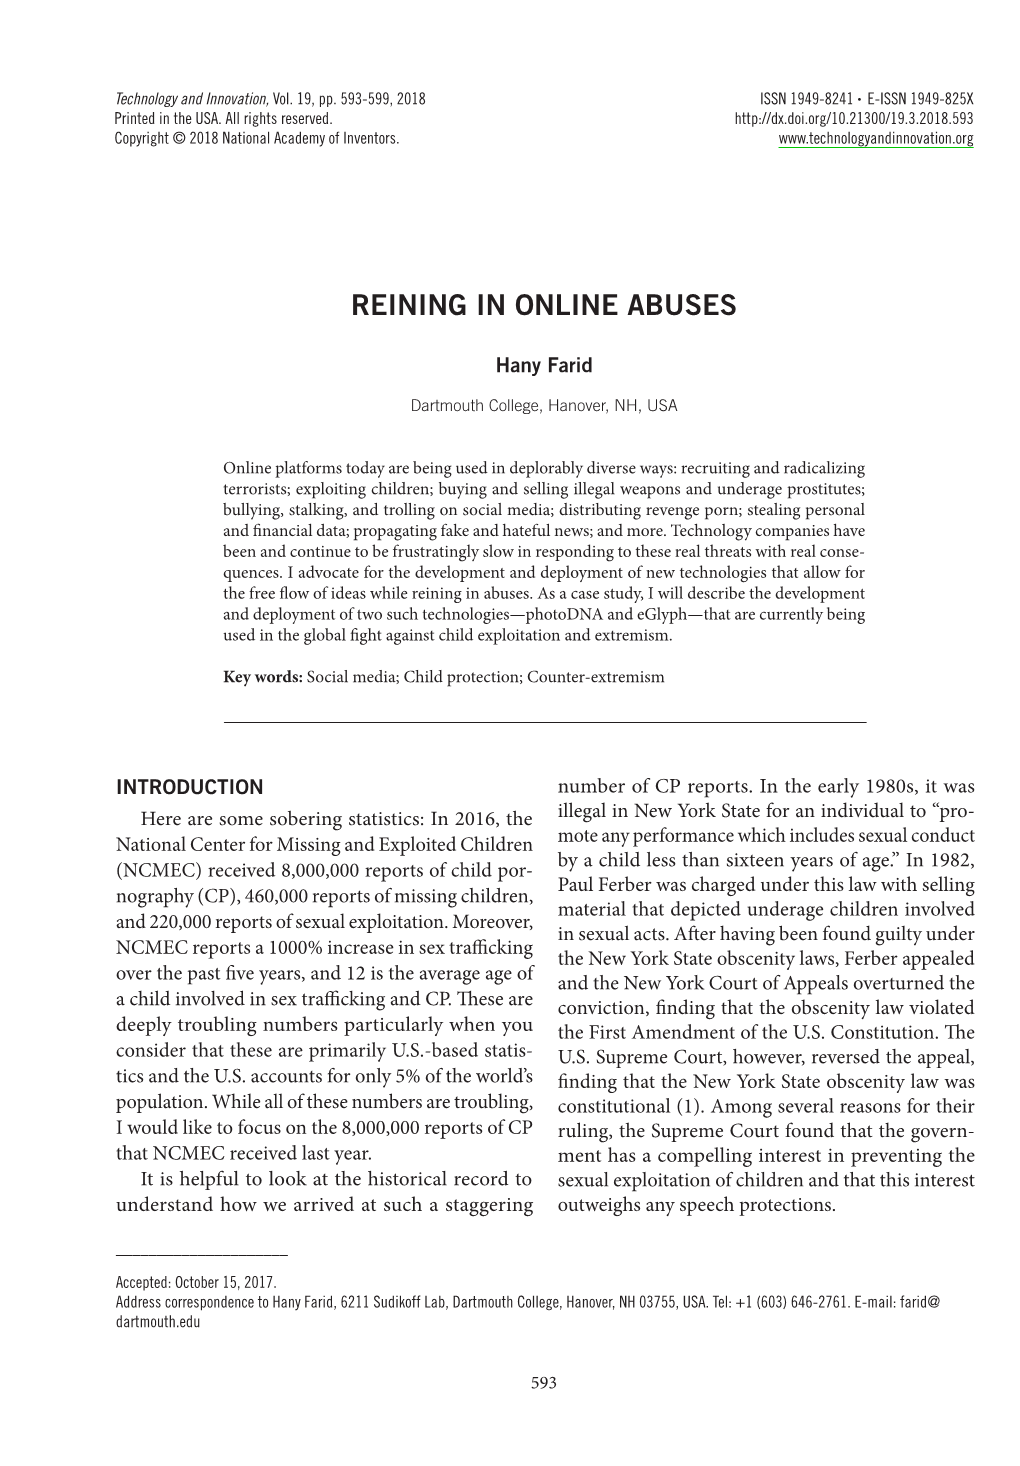 Reining in Online Abuses